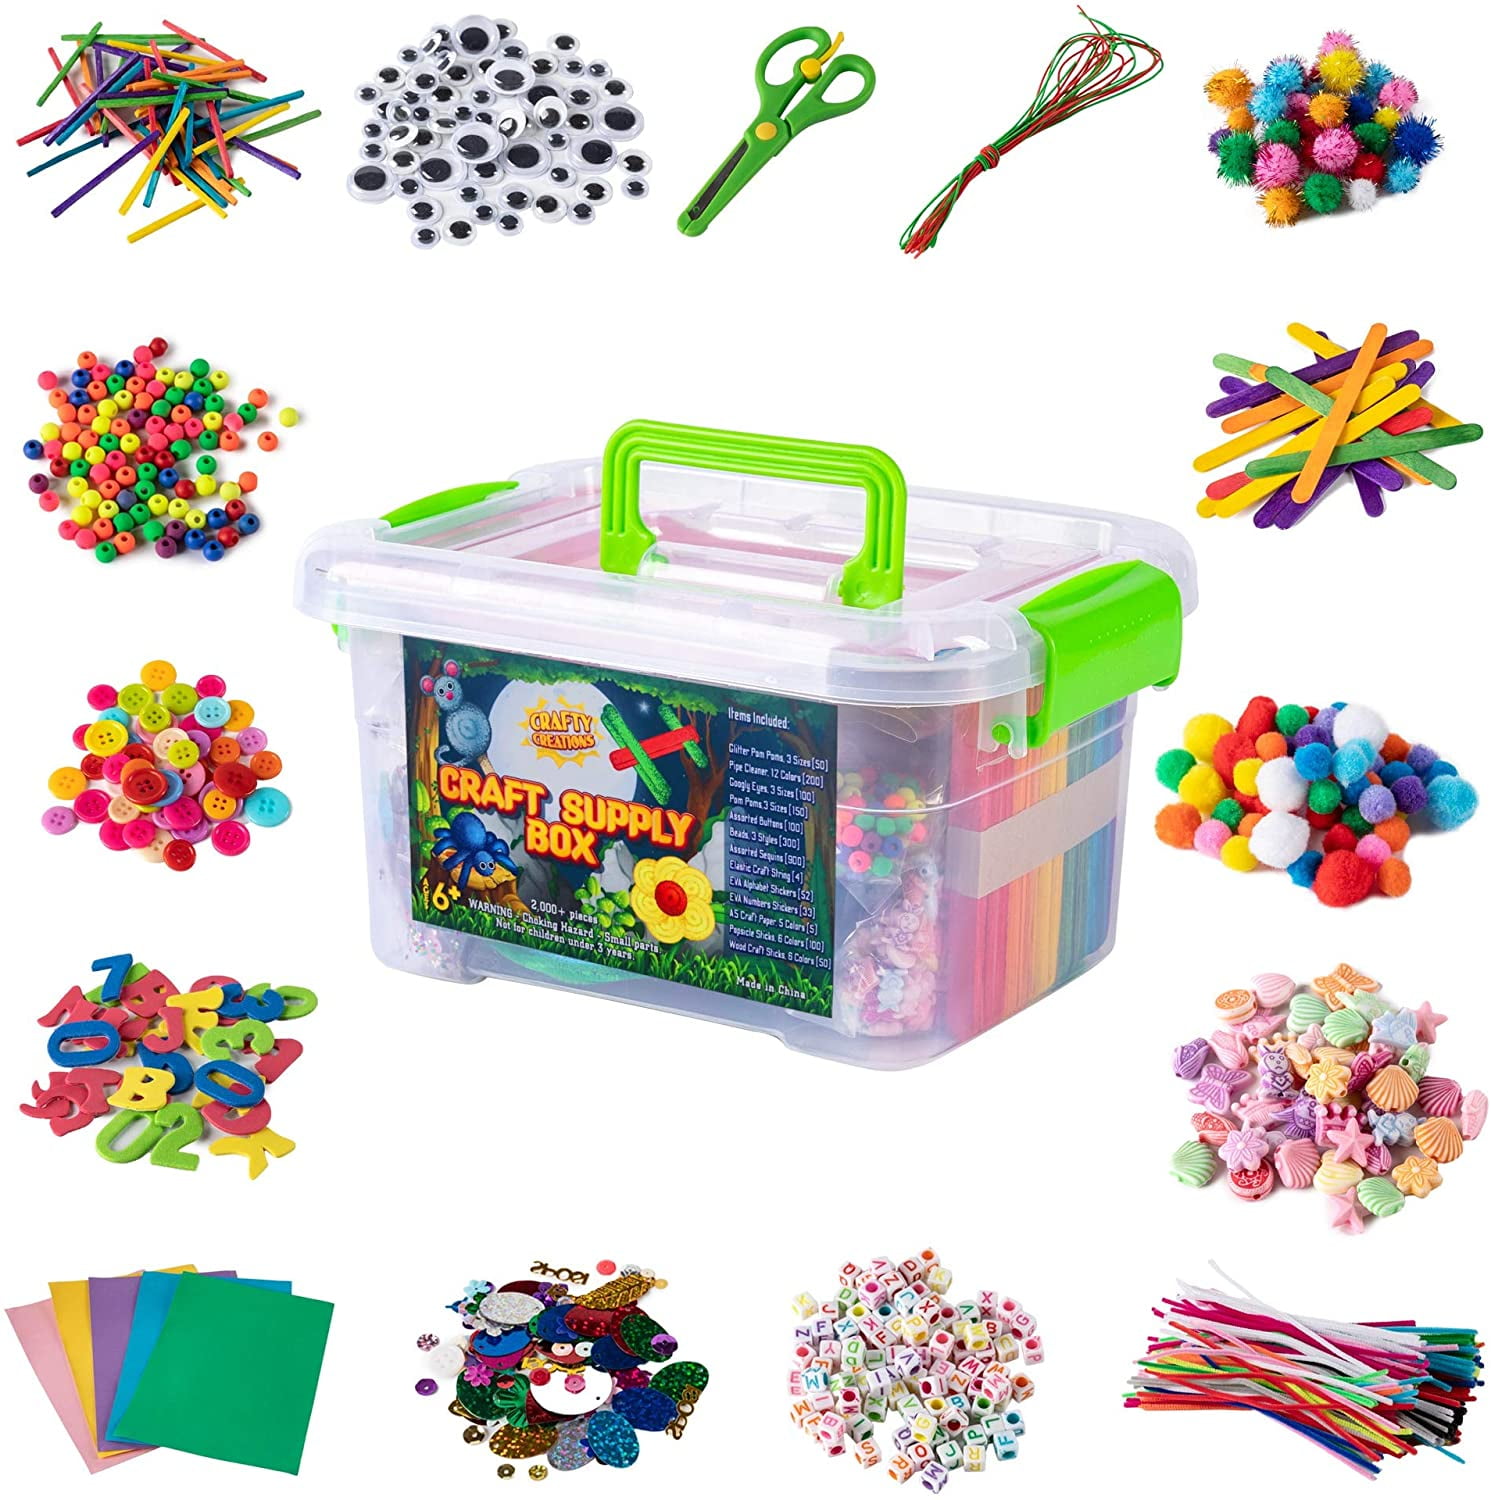 Arts & Crafts Kit for Kids - Special Bundle, Deluxe Craft Chest & XXXL  Craft Bag - 5000+ Pieces